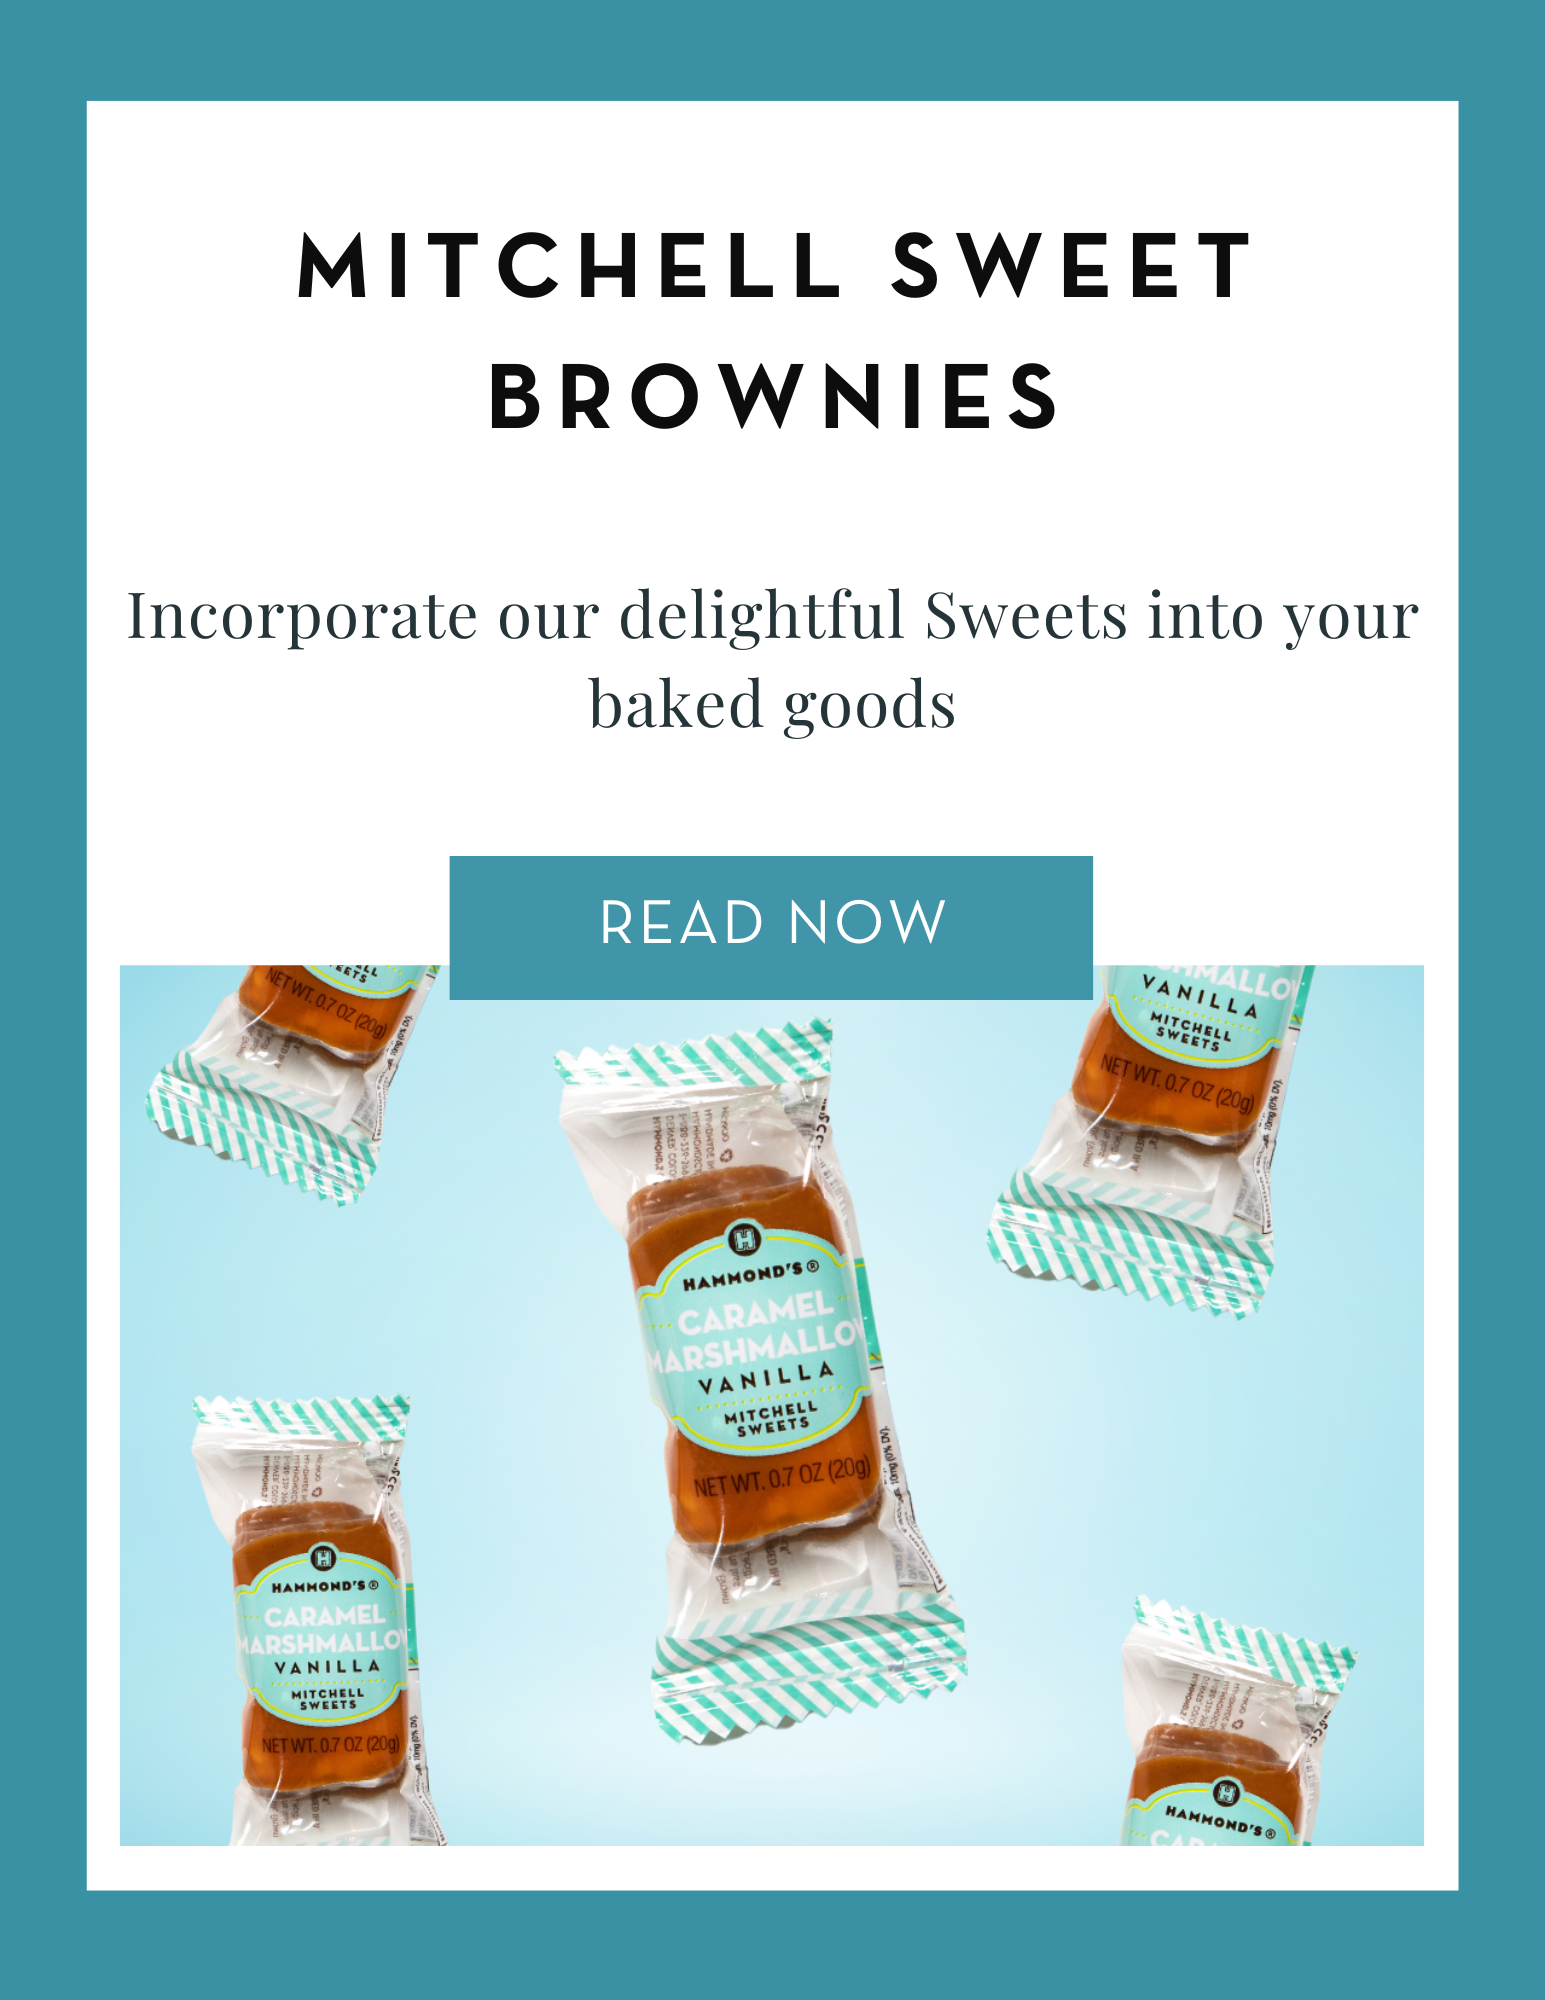 Mitchell Sweet Brownies